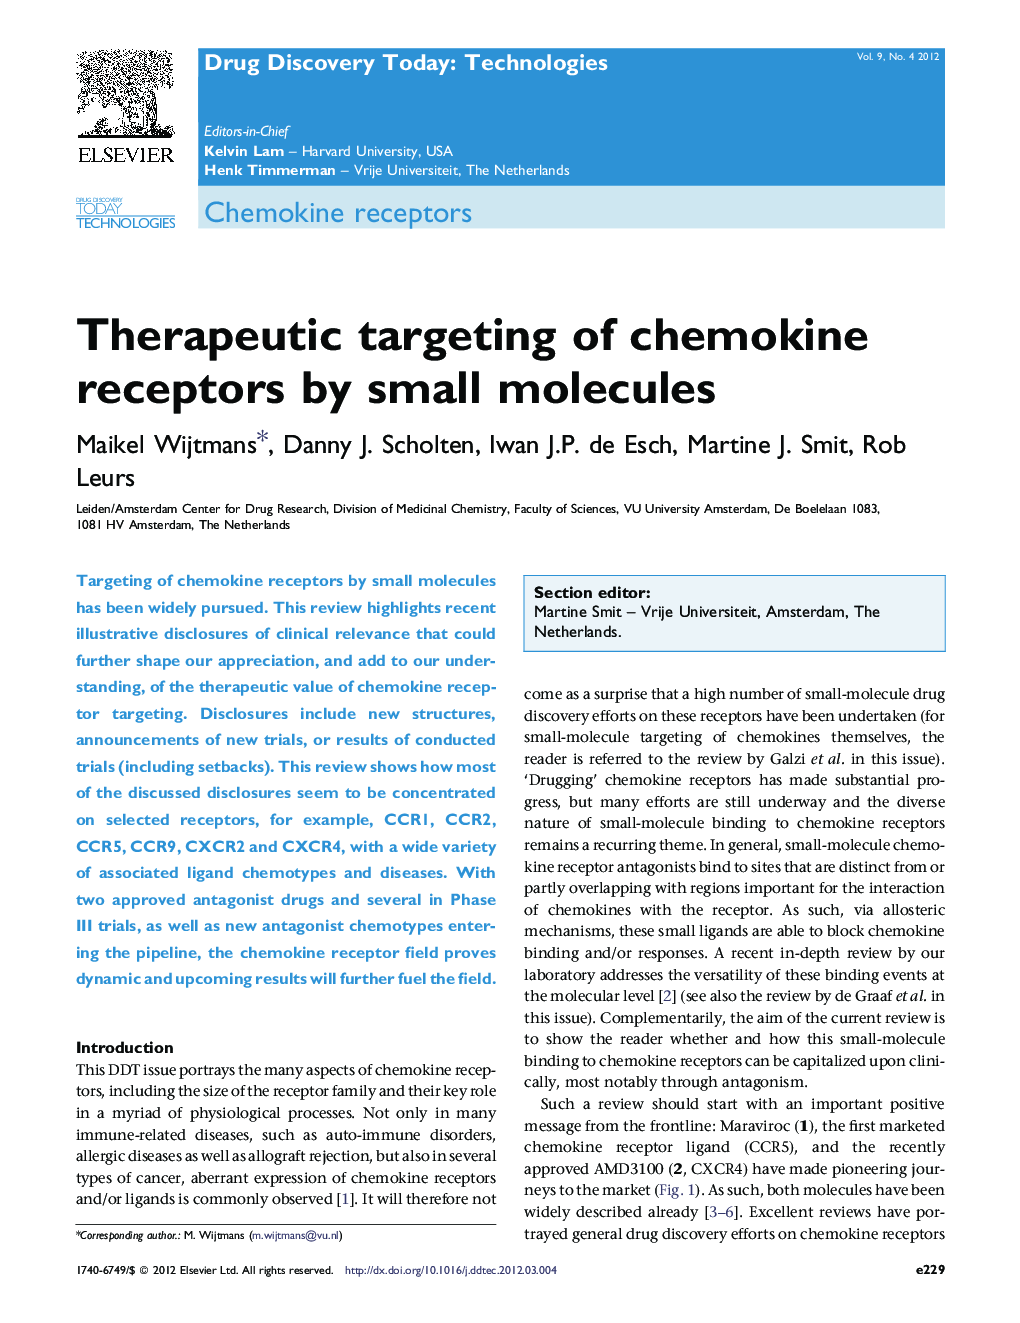 Therapeutic targeting of chemokine receptors by small molecules